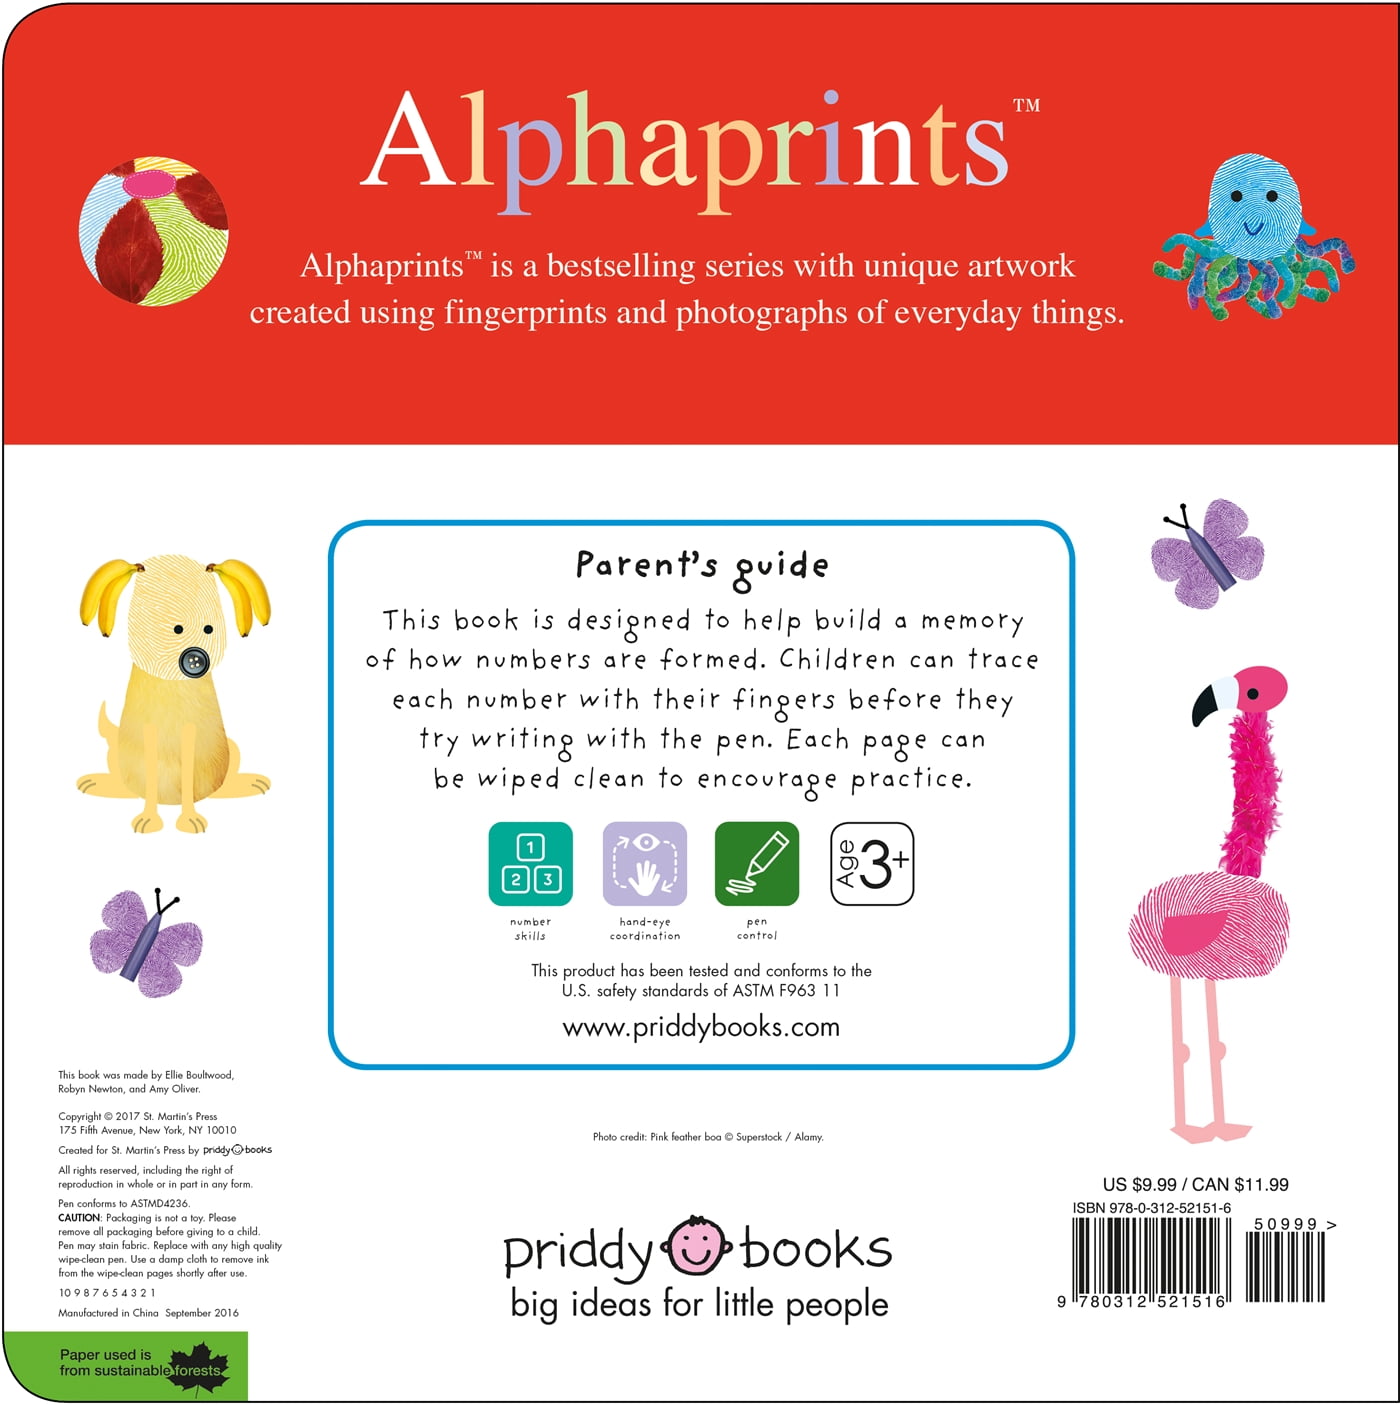 Alphaprints: Trace, Write, And Learn Abc - By Roger Priddy (board Book) :  Target